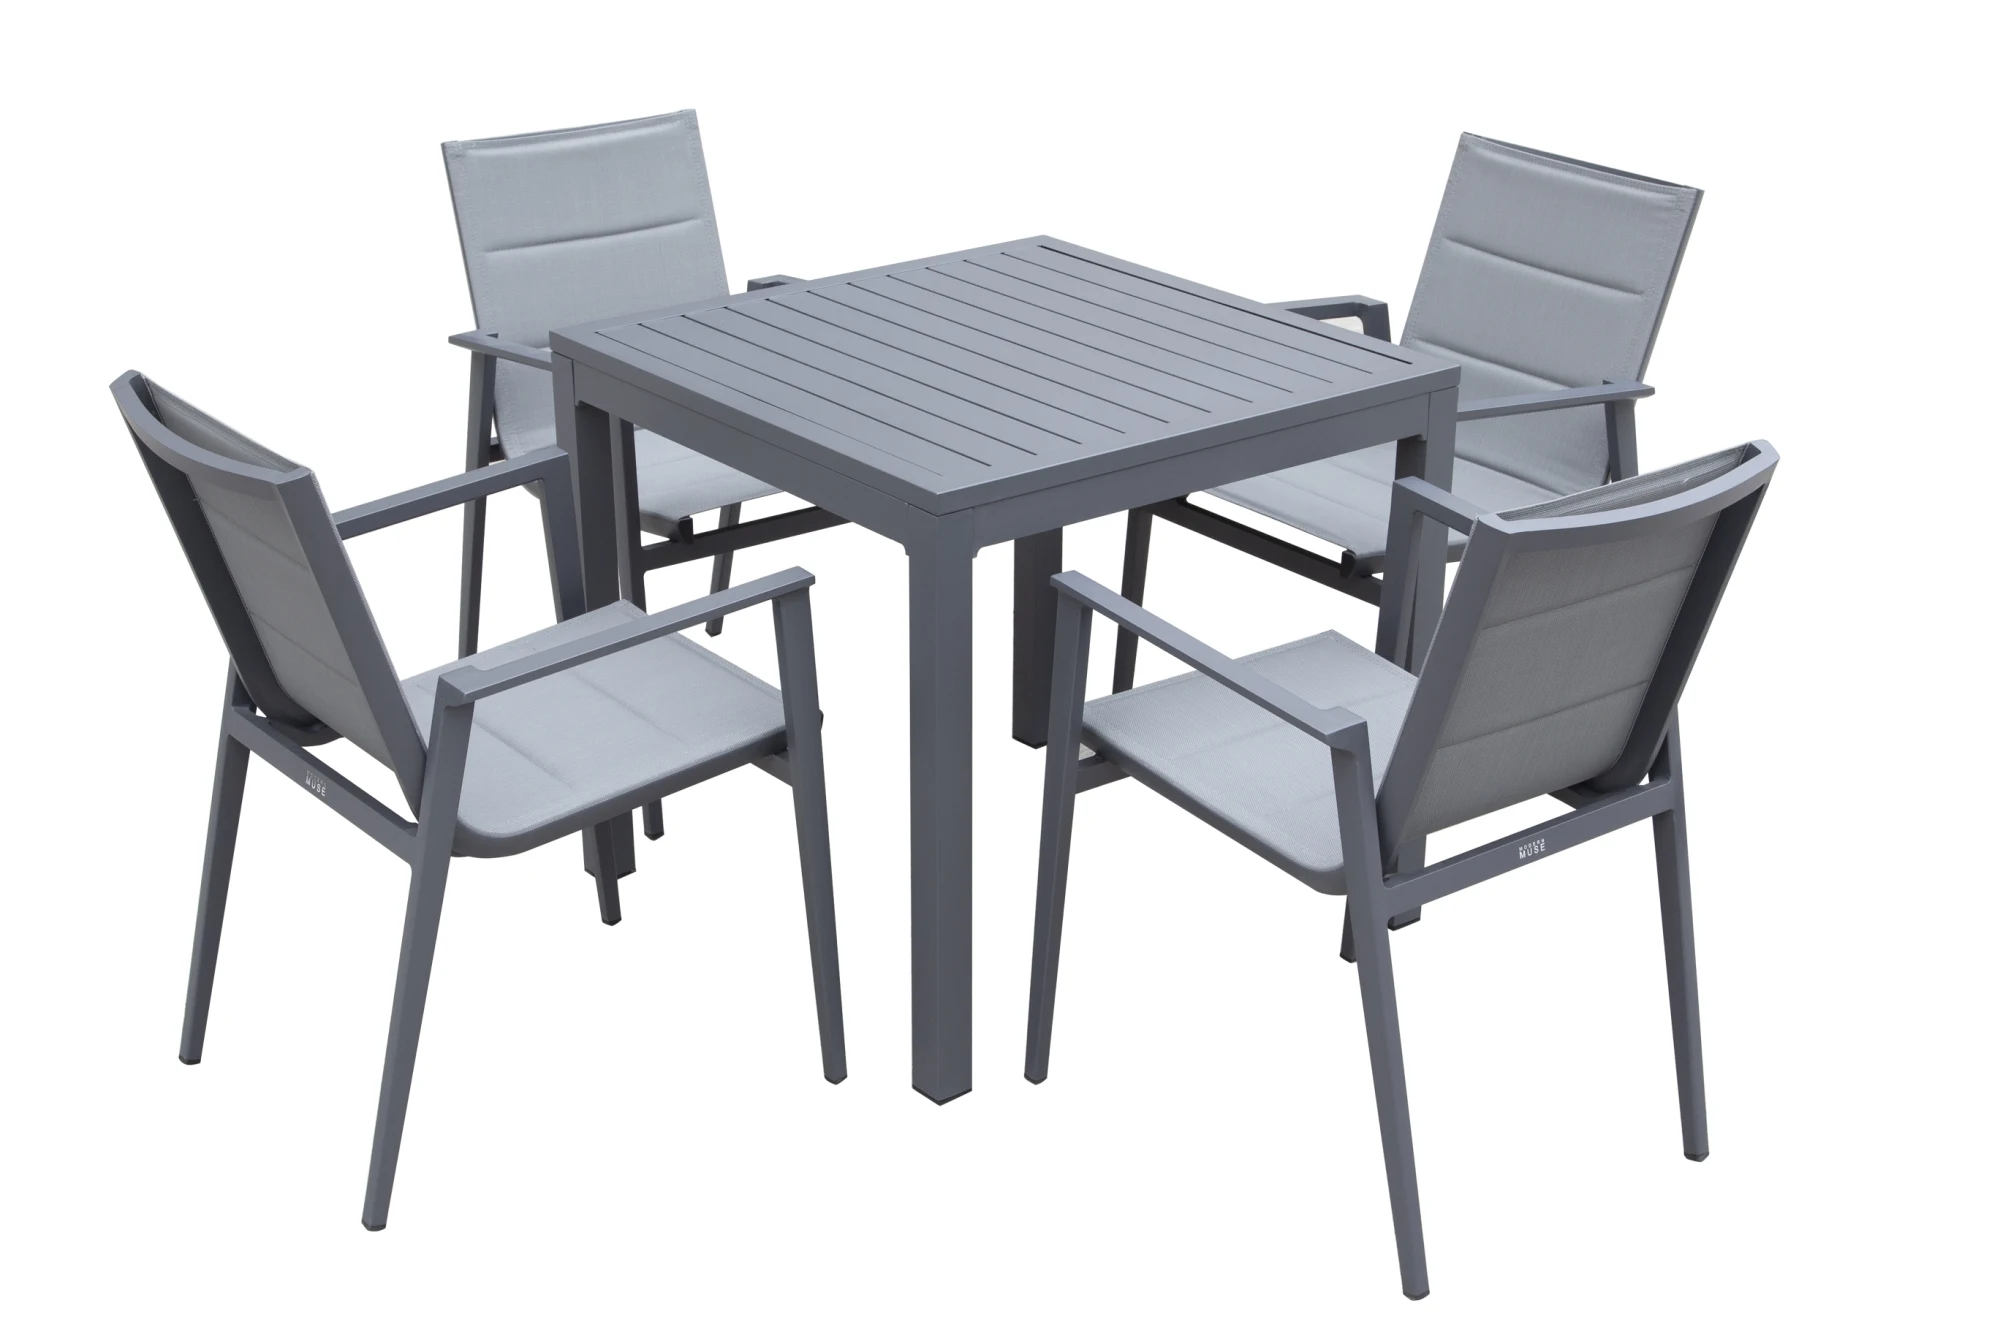 mm-5624-dst-patio-furniture-sets-at-lowes